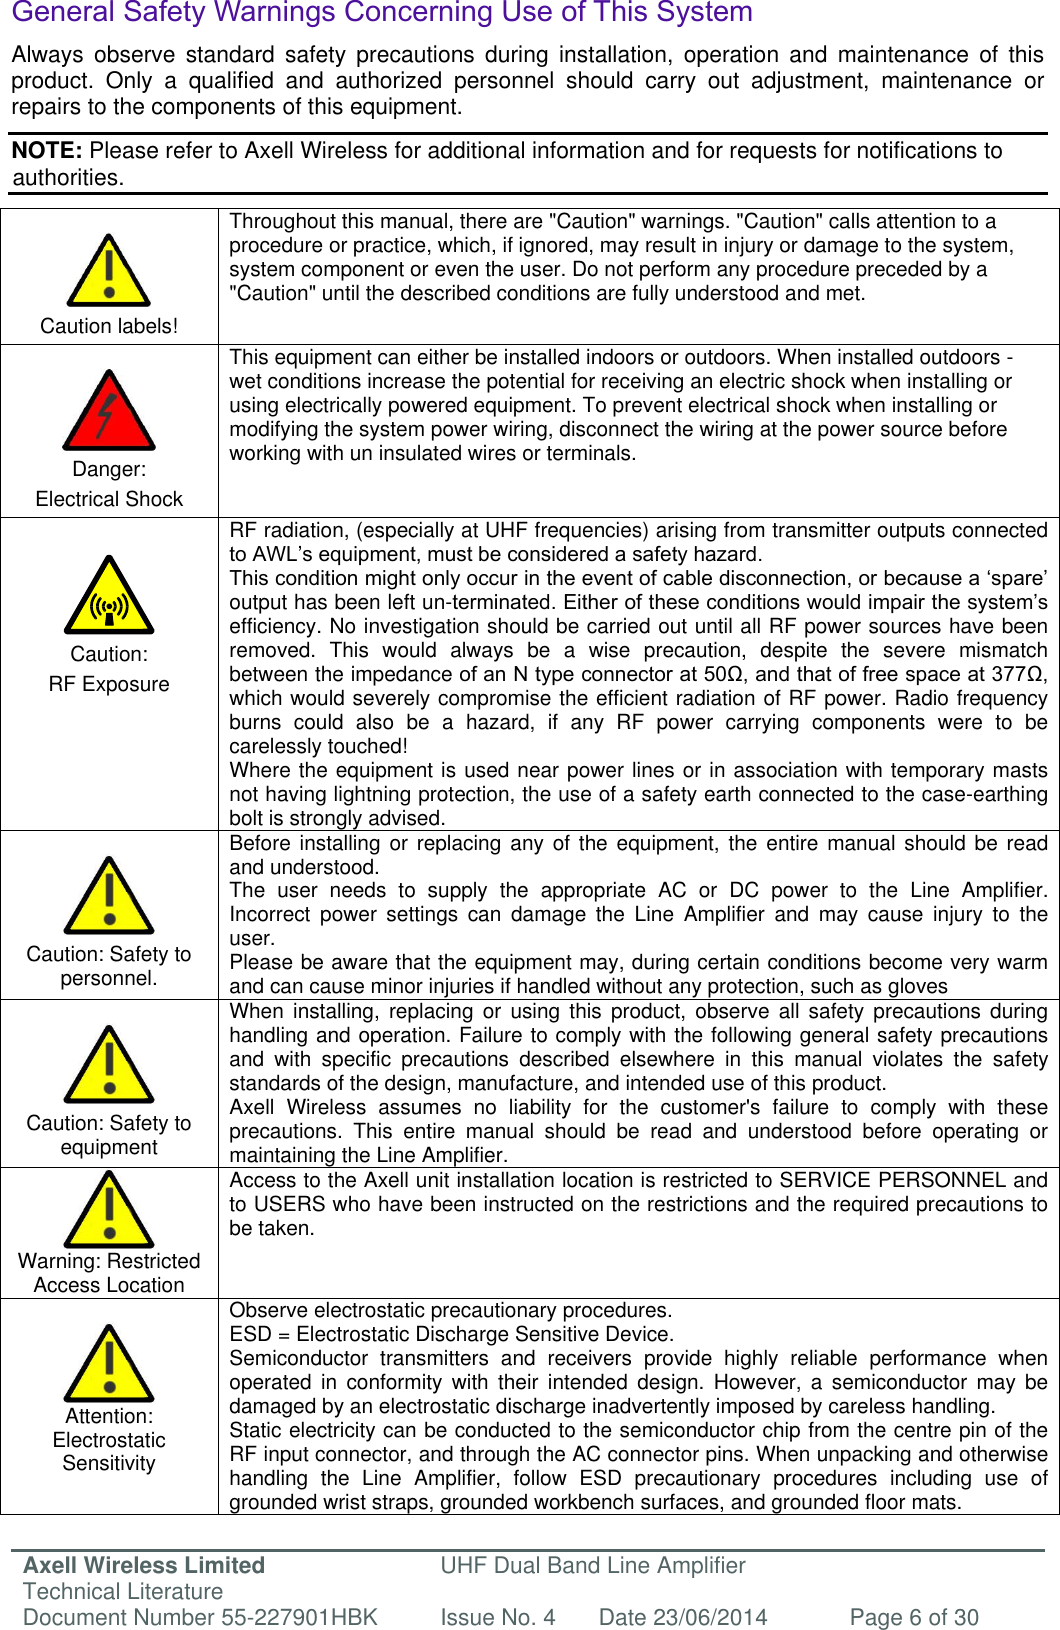 Axell Wireless Limited Technical Literature UHF Dual Band Line Amplifier Document Number 55-227901HBK Issue No. 4 Date 23/06/2014 Page 6 of 30   General Safety Warnings Concerning Use of This System Always  observe  standard  safety  precautions  during  installation,  operation  and  maintenance  of  this product.  Only  a  qualified  and  authorized  personnel  should  carry  out  adjustment,  maintenance  or repairs to the components of this equipment. NOTE: Please refer to Axell Wireless for additional information and for requests for notifications to authorities.   Caution labels! Throughout this manual, there are &quot;Caution&quot; warnings. &quot;Caution&quot; calls attention to a procedure or practice, which, if ignored, may result in injury or damage to the system, system component or even the user. Do not perform any procedure preceded by a &quot;Caution&quot; until the described conditions are fully understood and met.    Danger:  Electrical Shock This equipment can either be installed indoors or outdoors. When installed outdoors - wet conditions increase the potential for receiving an electric shock when installing or using electrically powered equipment. To prevent electrical shock when installing or modifying the system power wiring, disconnect the wiring at the power source before working with un insulated wires or terminals.   Caution:  RF Exposure RF radiation, (especially at UHF frequencies) arising from transmitter outputs connected to AWL’s equipment, must be considered a safety hazard. This condition might only occur in the event of cable disconnection, or because a ‘spare’ output has been left un-terminated. Either of these conditions would impair the system’s efficiency. No investigation should be carried out until all RF power sources have been removed.  This  would  always  be  a  wise  precaution,  despite  the  severe  mismatch between the impedance of an N type connector at 50Ω, and that of free space at 377Ω, which would severely compromise the efficient radiation of RF power. Radio frequency burns  could  also  be  a  hazard,  if  any  RF  power  carrying  components  were  to  be carelessly touched! Where the equipment is used near power lines or in association with temporary masts not having lightning protection, the use of a safety earth connected to the case-earthing bolt is strongly advised.   Caution: Safety to personnel. Before installing or  replacing  any  of  the equipment, the  entire  manual should be read and understood. The  user  needs  to  supply  the  appropriate  AC  or  DC  power  to  the  Line  Amplifier. Incorrect  power  settings  can  damage  the  Line  Amplifier  and  may  cause  injury  to  the user. Please be aware that the equipment may, during certain conditions become very warm and can cause minor injuries if handled without any protection, such as gloves   Caution: Safety to equipment When  installing,  replacing  or  using  this  product,  observe  all  safety  precautions  during handling and operation. Failure to comply with the following general safety precautions and  with  specific  precautions  described  elsewhere  in  this  manual  violates  the  safety standards of the design, manufacture, and intended use of this product.  Axell  Wireless  assumes  no  liability  for  the  customer&apos;s  failure  to  comply  with  these precautions.  This  entire  manual  should  be  read  and  understood  before  operating  or maintaining the Line Amplifier.  Warning: Restricted Access Location Access to the Axell unit installation location is restricted to SERVICE PERSONNEL and to USERS who have been instructed on the restrictions and the required precautions to be taken.   Attention:  Electrostatic  Sensitivity  Observe electrostatic precautionary procedures. ESD = Electrostatic Discharge Sensitive Device.  Semiconductor  transmitters  and  receivers  provide  highly  reliable  performance  when operated  in  conformity  with  their  intended  design.  However,  a  semiconductor  may  be damaged by an electrostatic discharge inadvertently imposed by careless handling. Static electricity can be conducted to the semiconductor chip from the centre pin of the RF input connector, and through the AC connector pins. When unpacking and otherwise handling  the  Line  Amplifier,  follow  ESD  precautionary  procedures  including  use  of grounded wrist straps, grounded workbench surfaces, and grounded floor mats.    